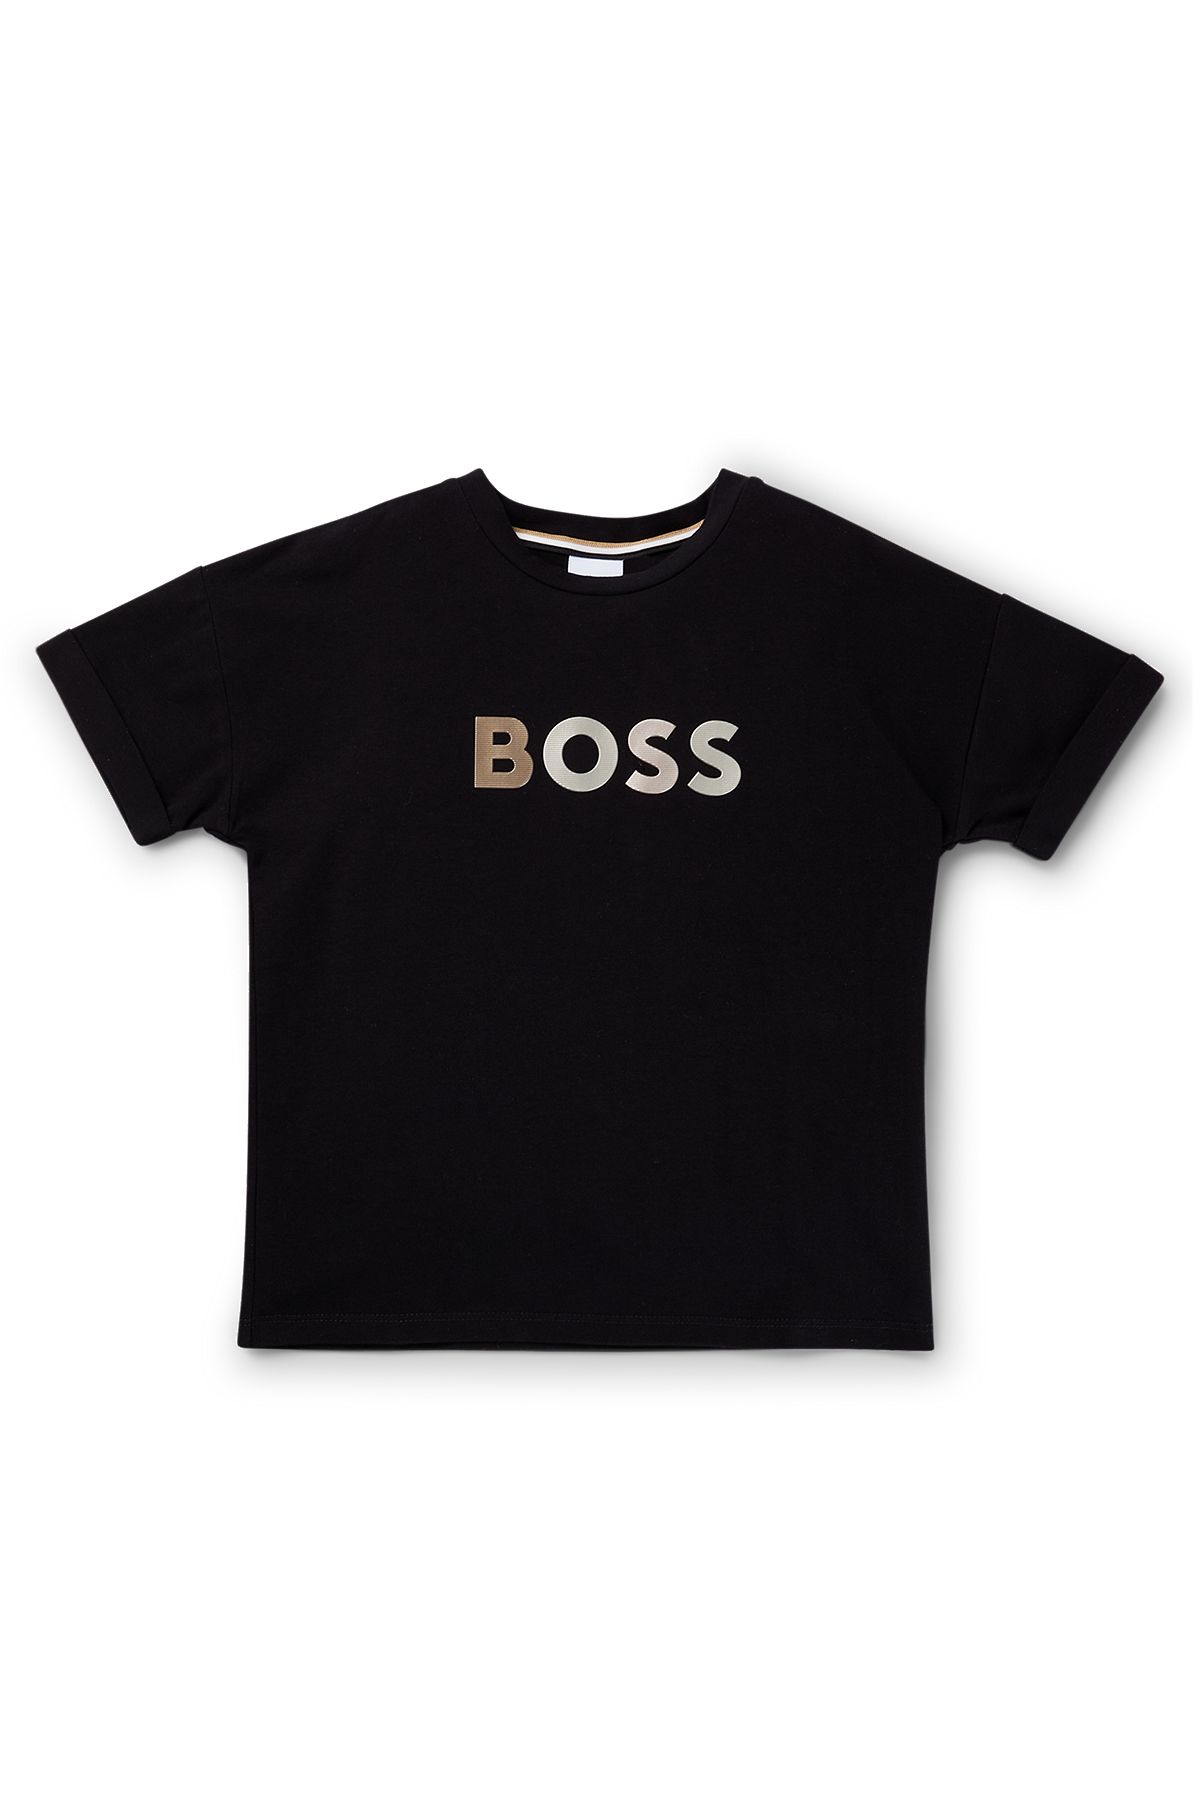 Kids' T-shirt in stretch cotton with gradient logo print, Black